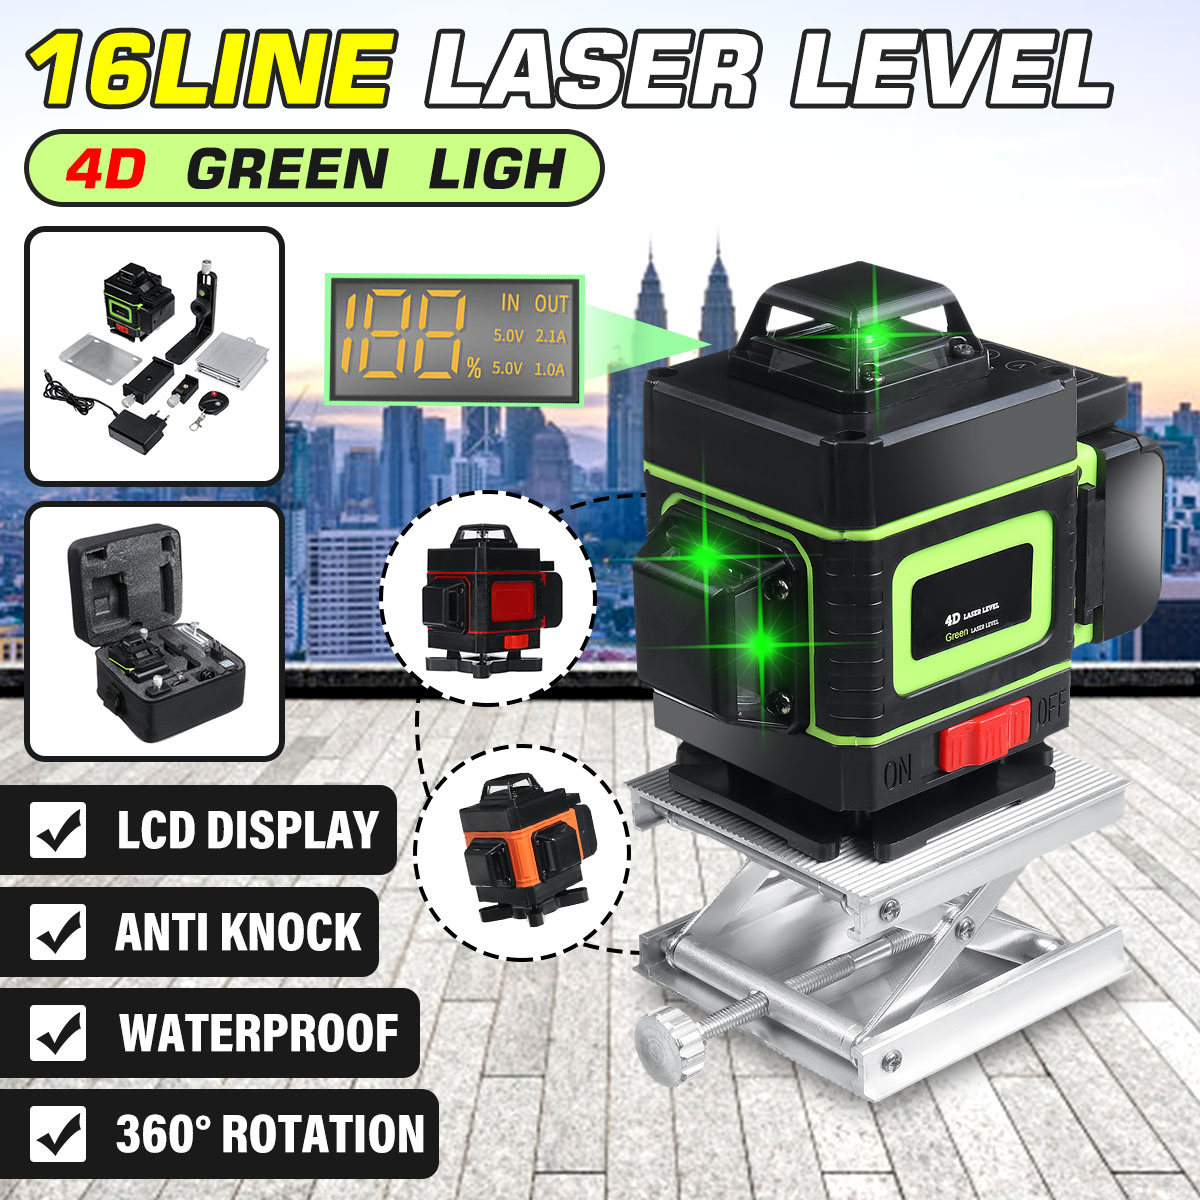 3D Laser Level 12 Line Green LED Display 360° Self Leveling Rotary Measure Tool